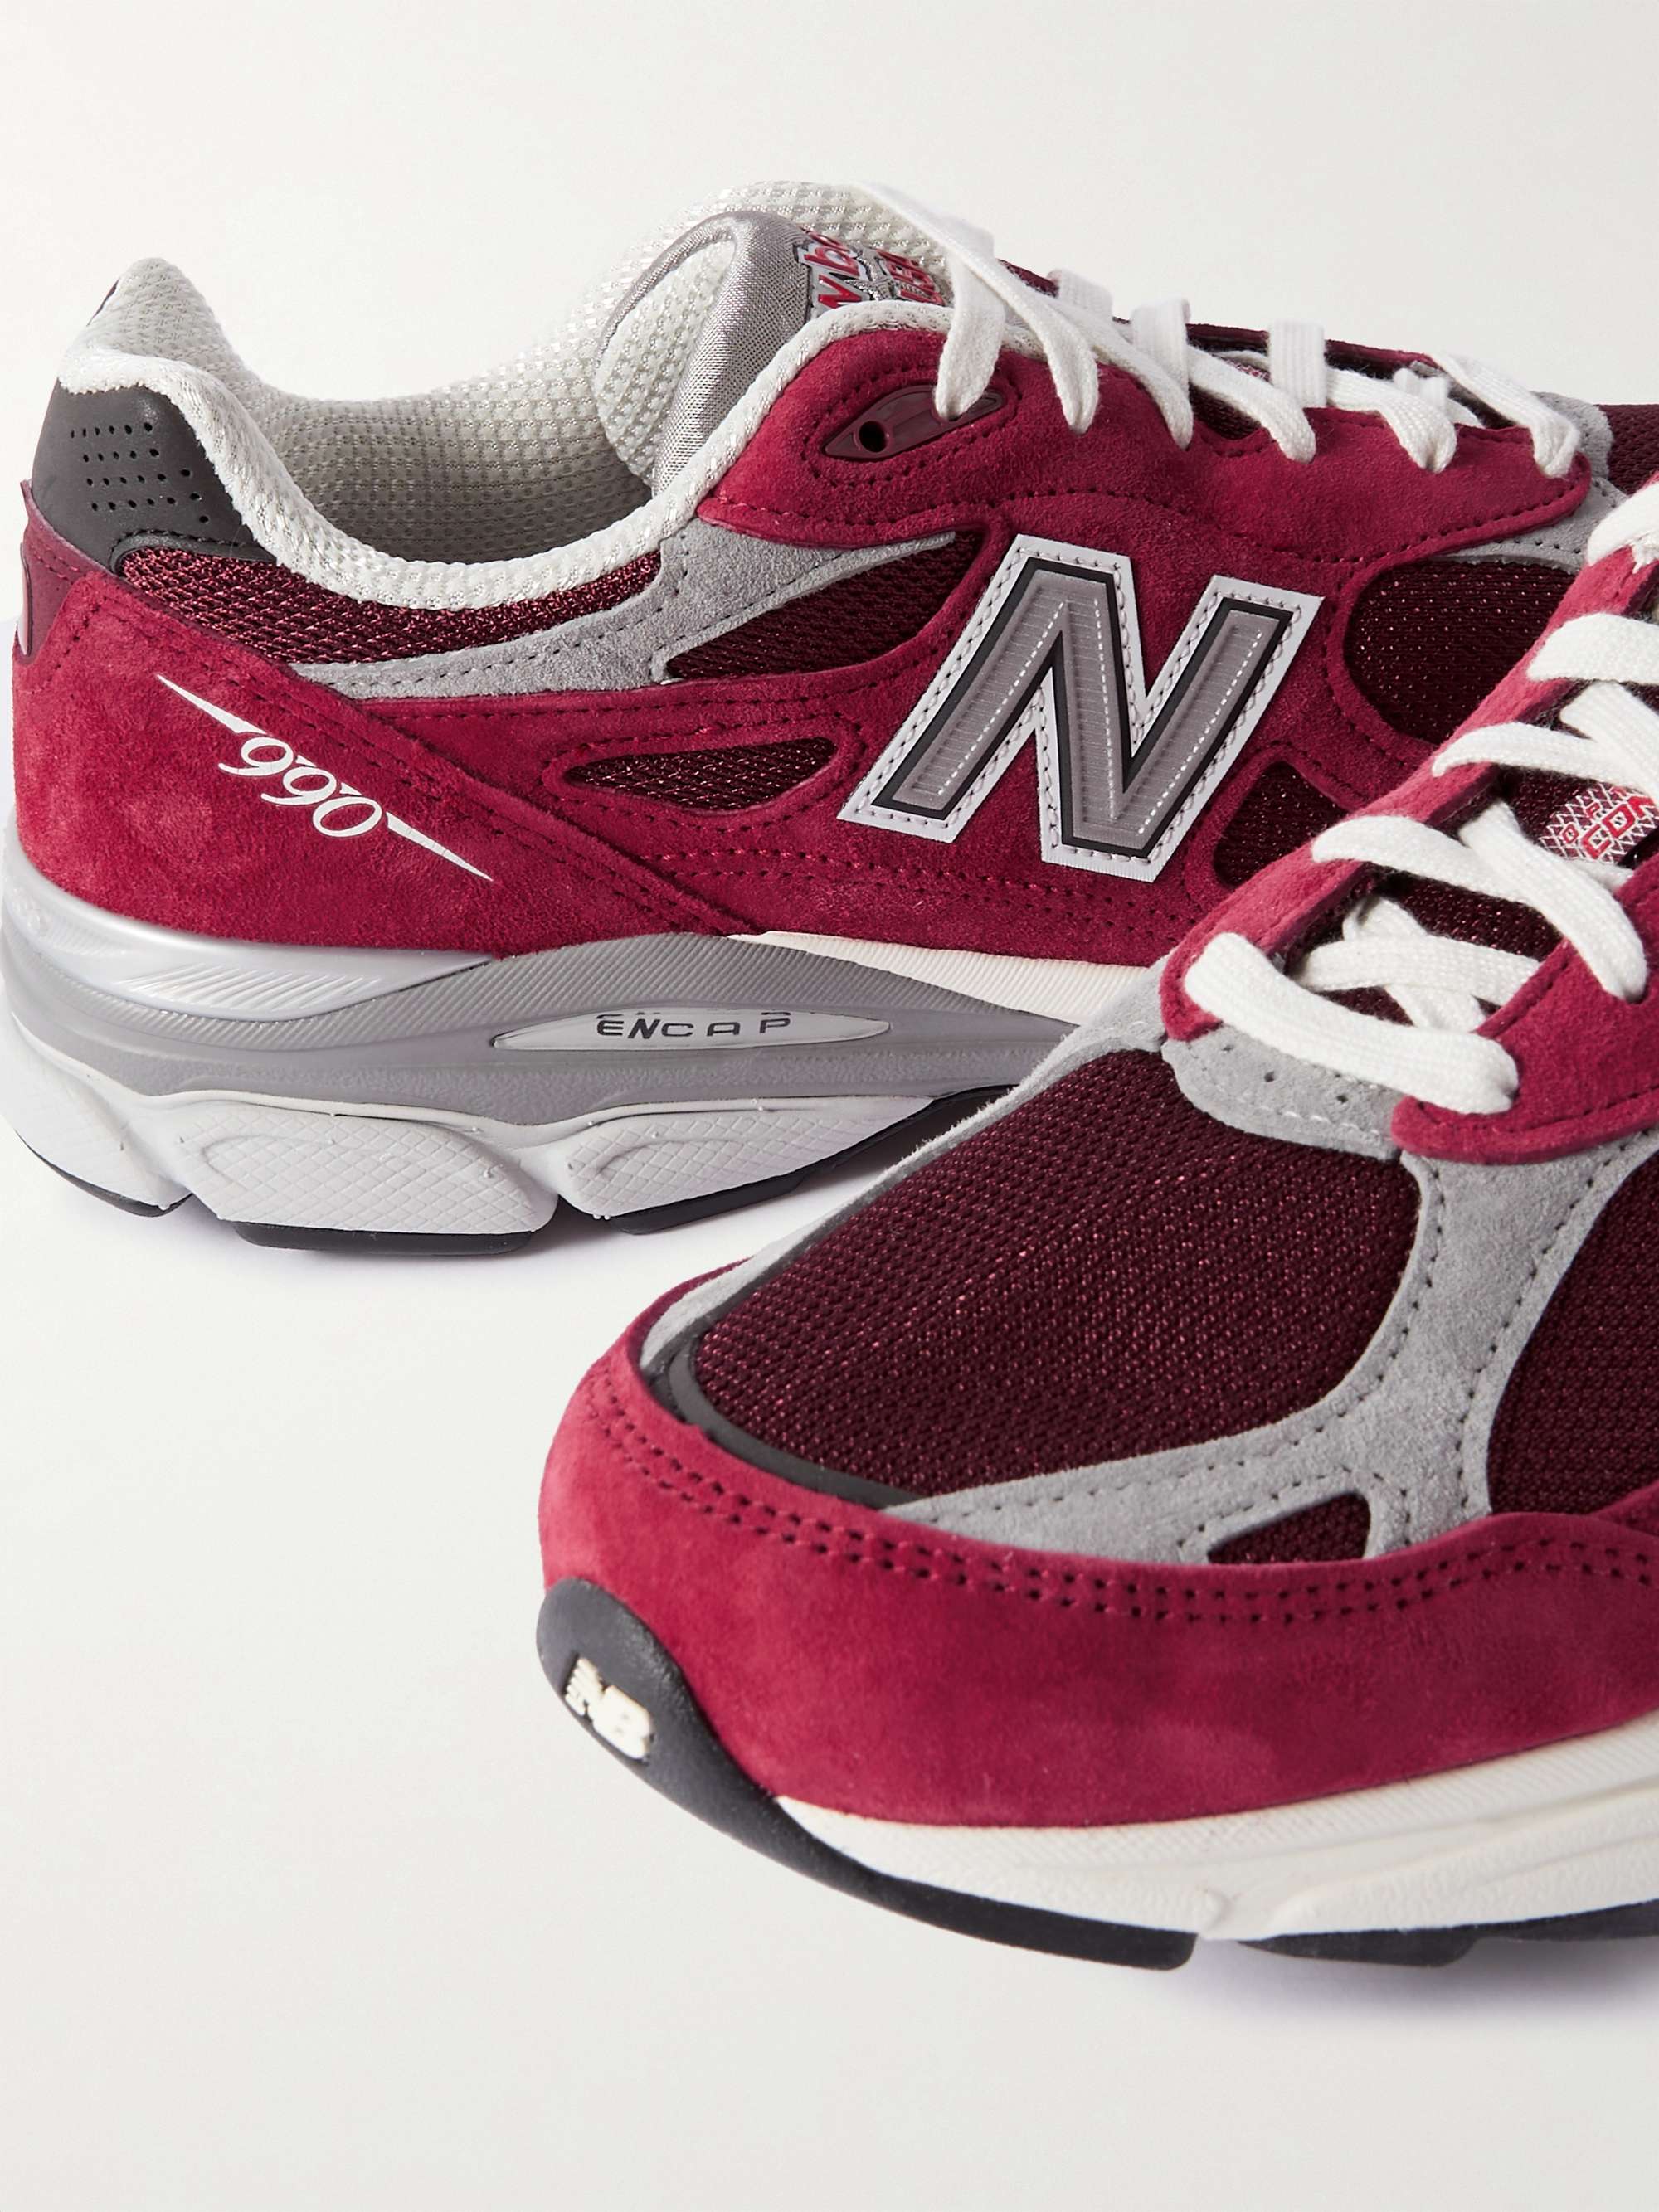 NEW BALANCE 990v3 Leather-Trimmed Suede and Mesh Sneakers